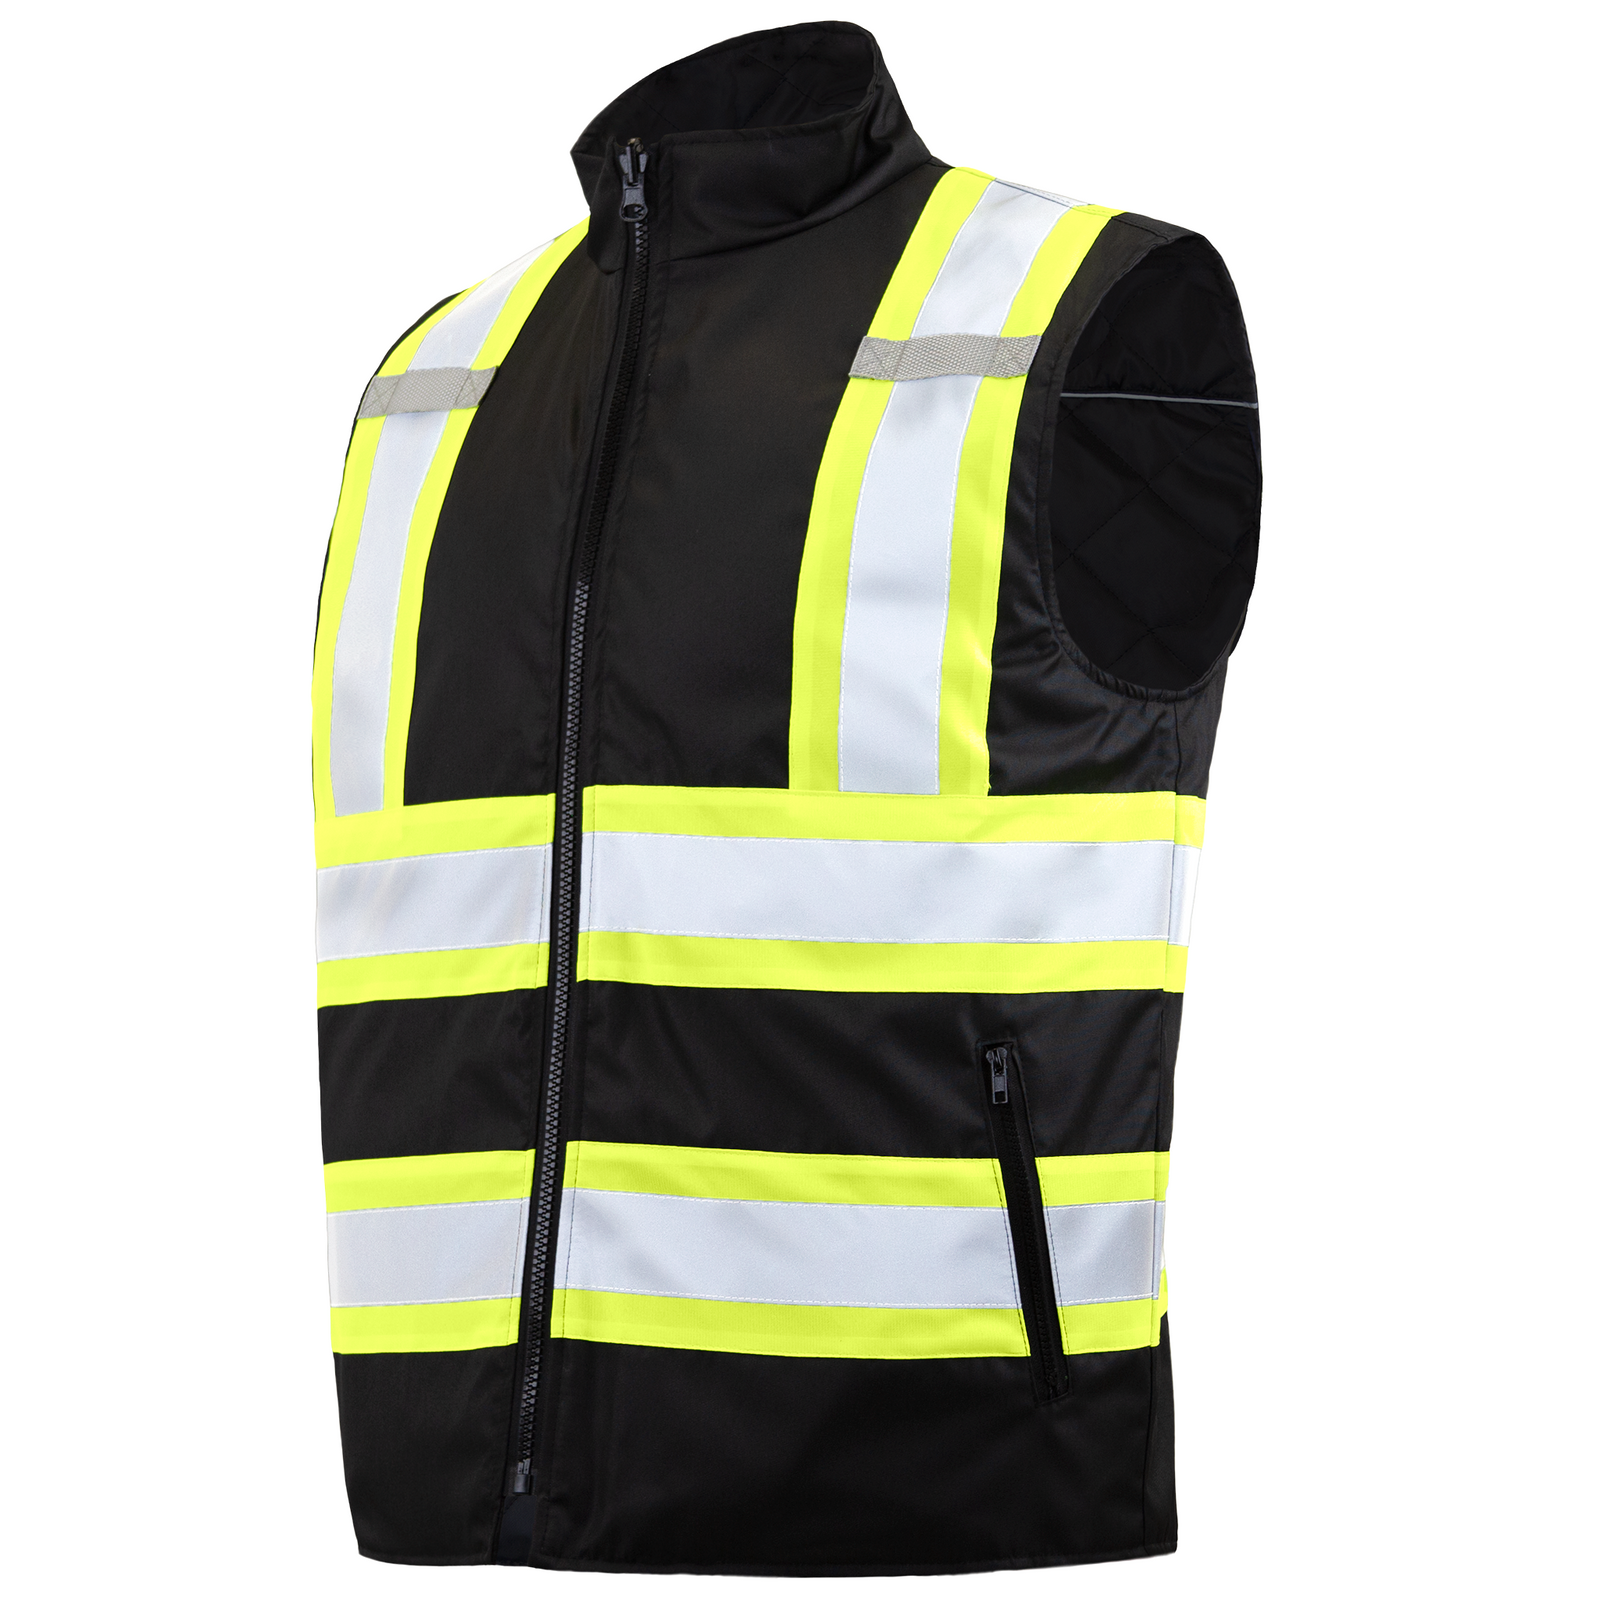 Back view of the black JORESTECH reversible safety vest with reflective strips and x on the back